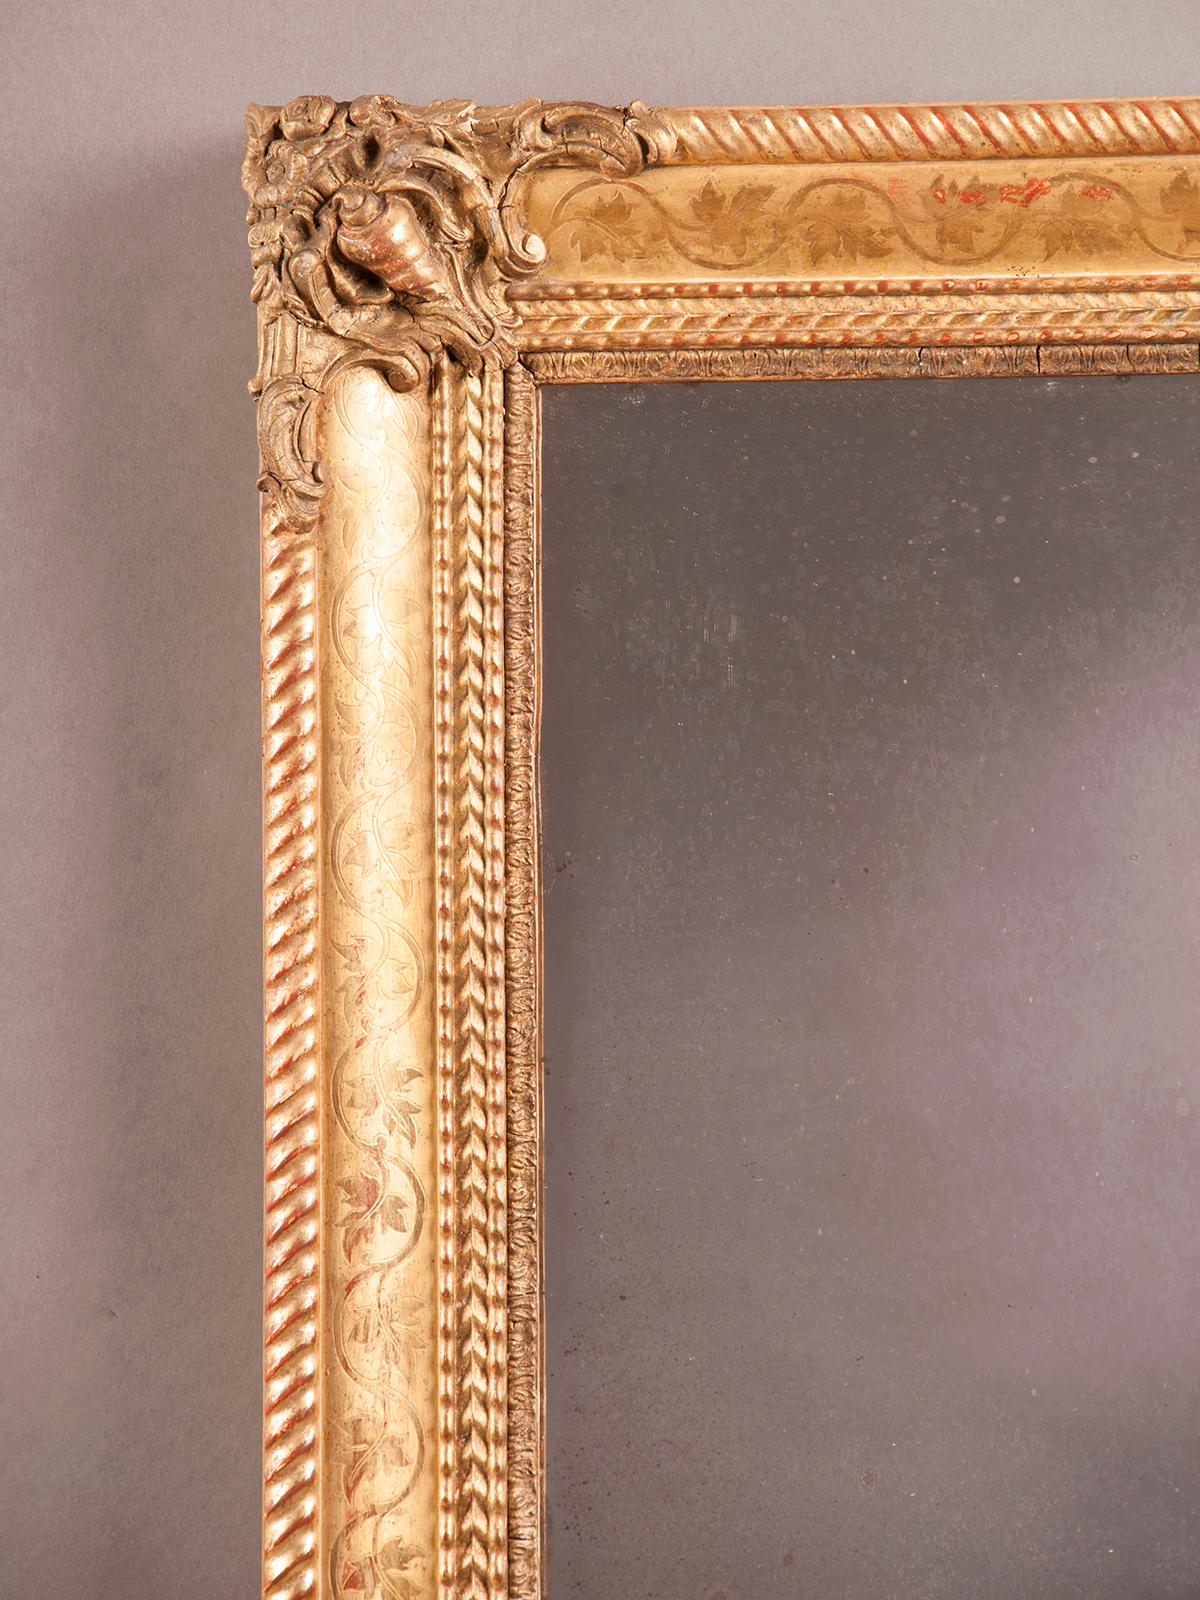 A handsome Charles X antique French gold leaf mirror, circa 1840. Please note that the symmetrical aspect of this mirror frame ensures it may be hung either vertically or horizontally. There is a unique aspect to this frame visible in each of the